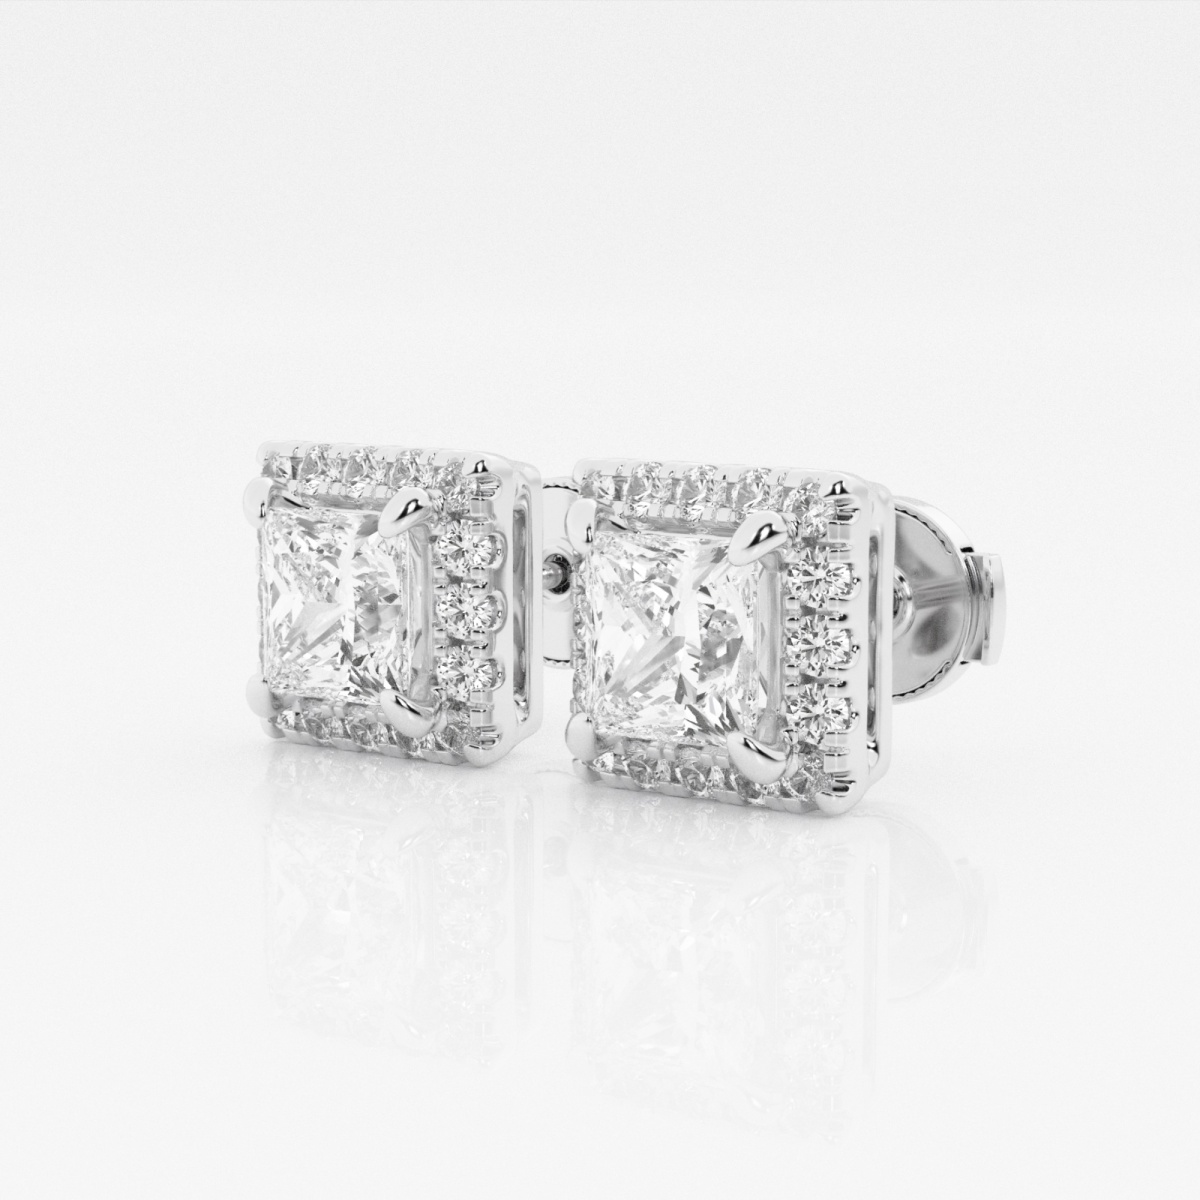 Additional Image 1 for  2 3/8 ctw Princess Lab Grown Diamond Halo Certified Stud Earrings